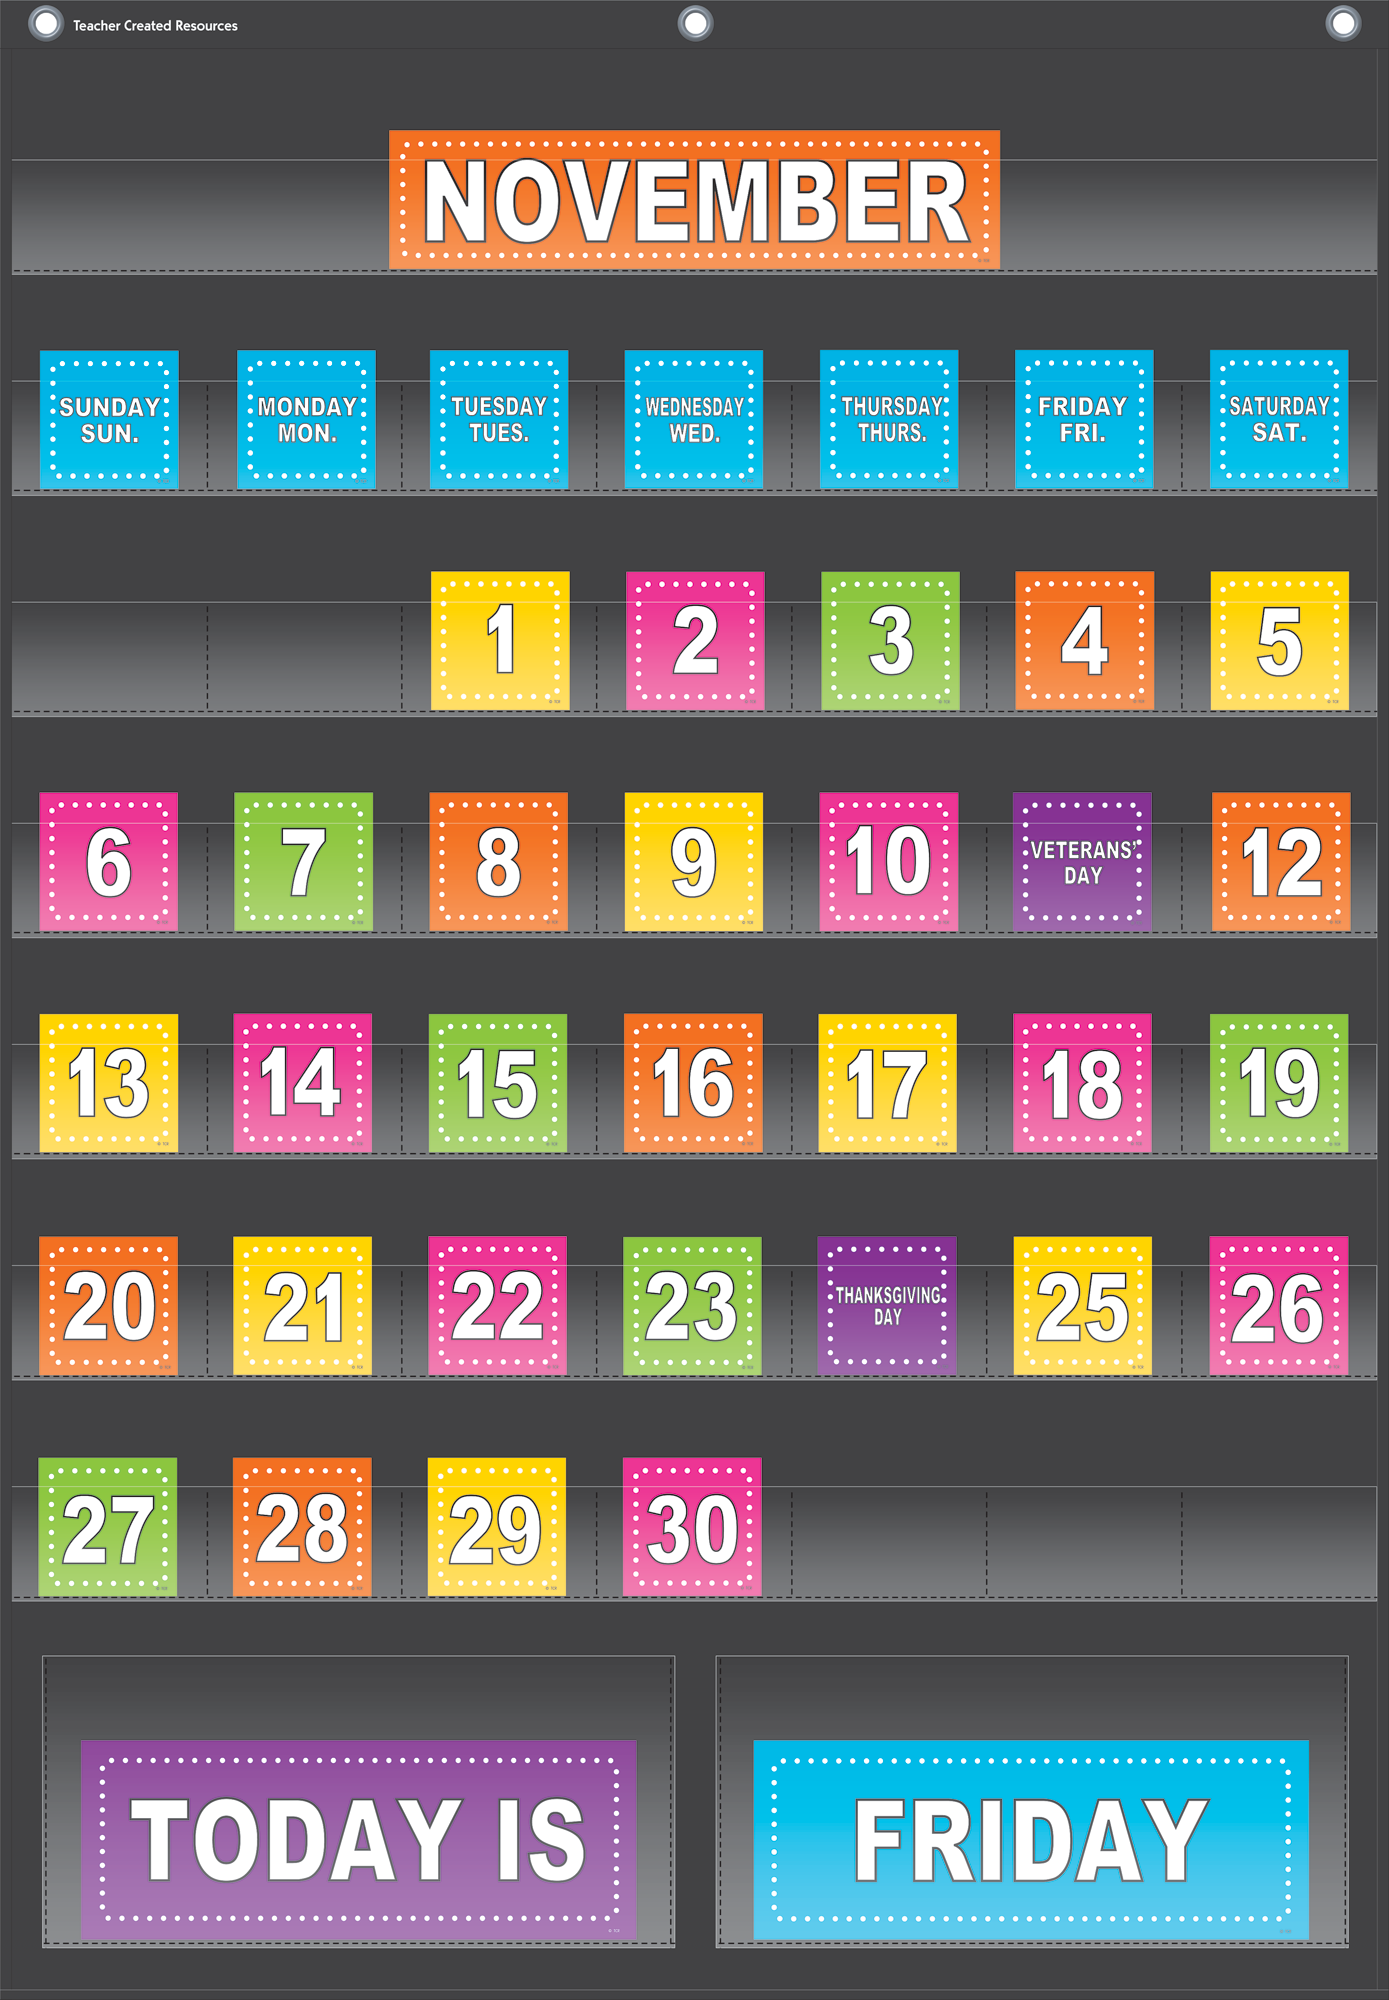 45 clear pockets hold calendar headliners and days. Includes 68 Calendar Pieces